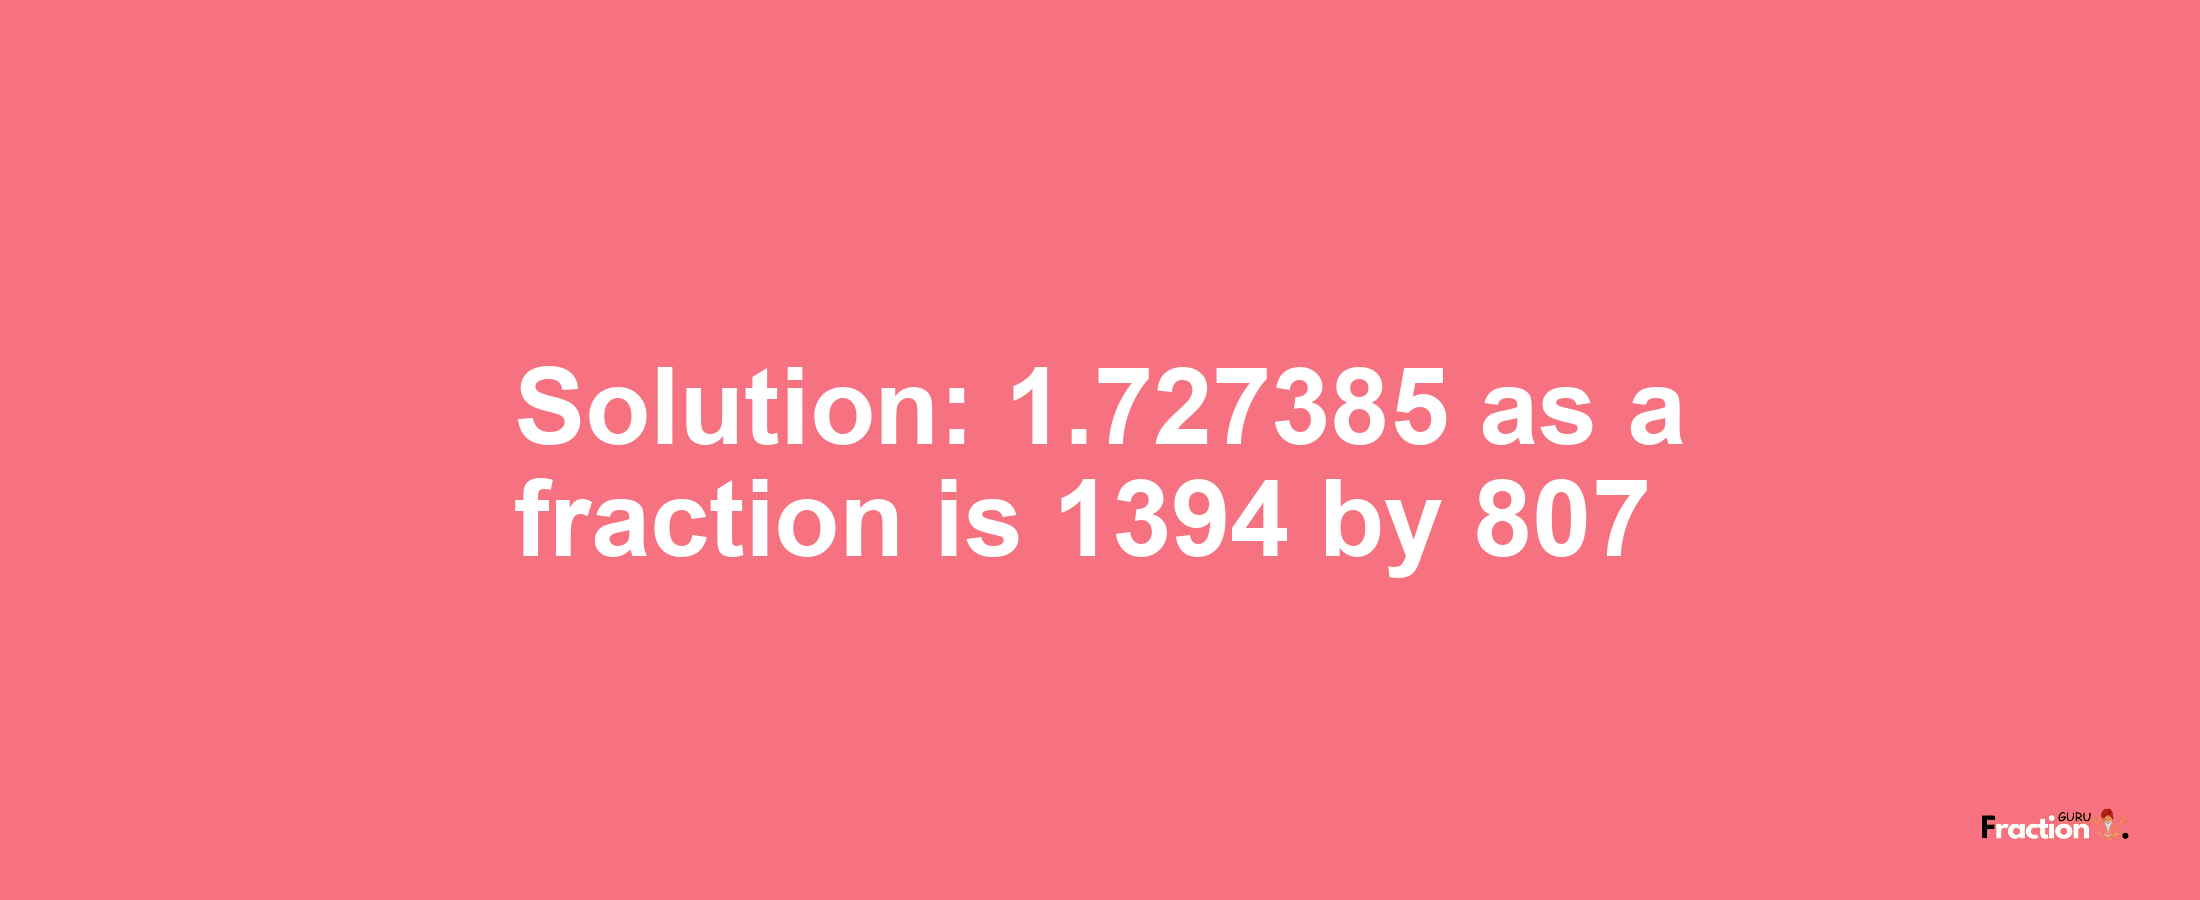 Solution:1.727385 as a fraction is 1394/807